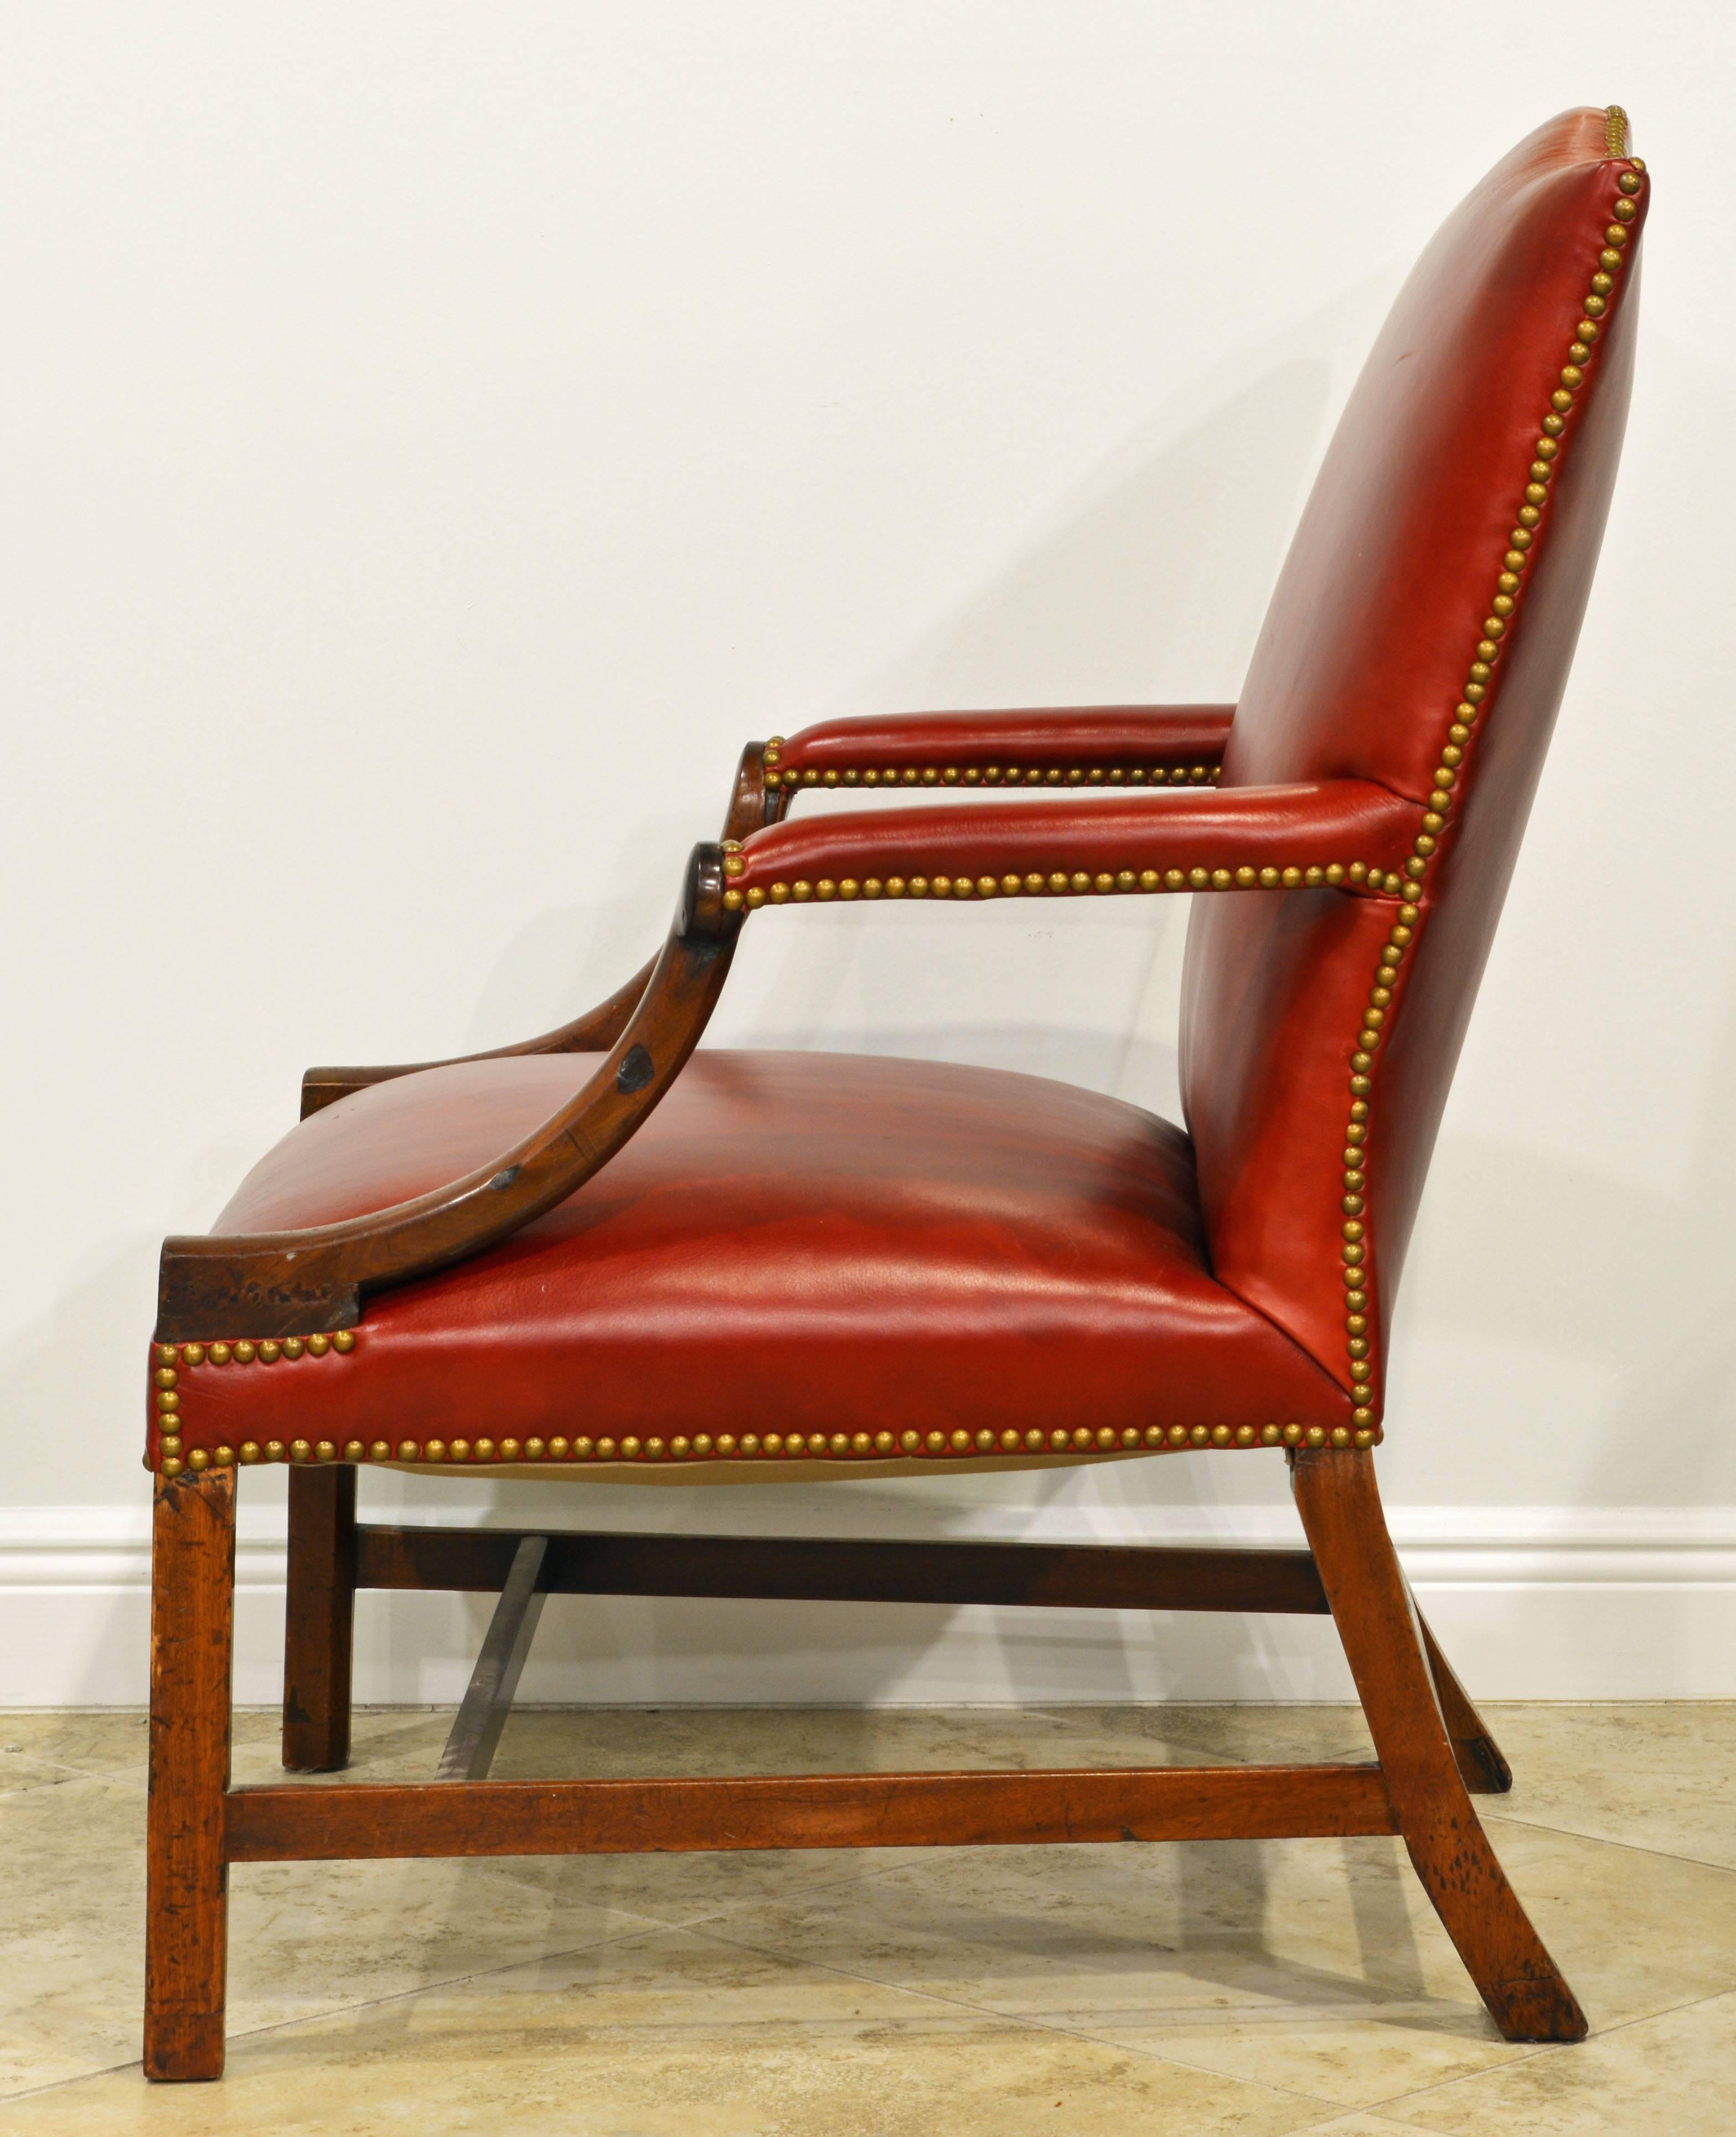 Georgian Good 19th Century Mahogany and Red Leather and Nailhead Trimmed Lolling Chair